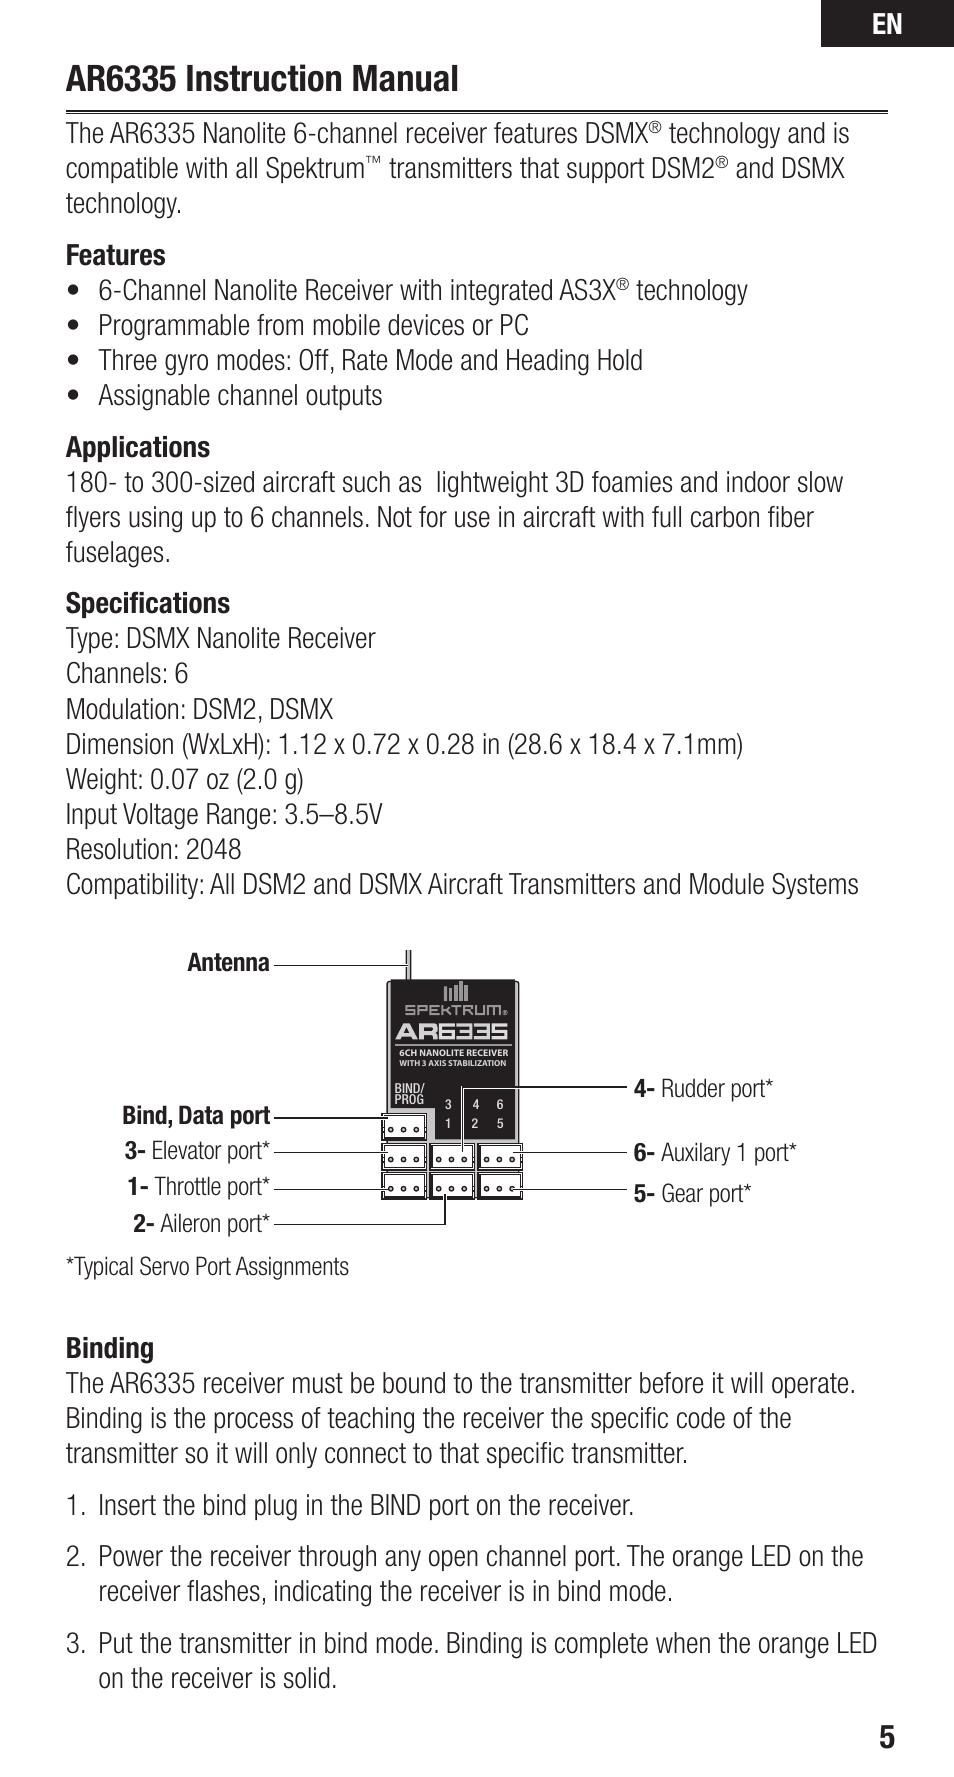 Ar6335 instruction manual, Technology and is compatible with all spektrum,  Transmitters that support dsm2 | Spektrum SPMAR6335 User Manual | Page 5 /  14